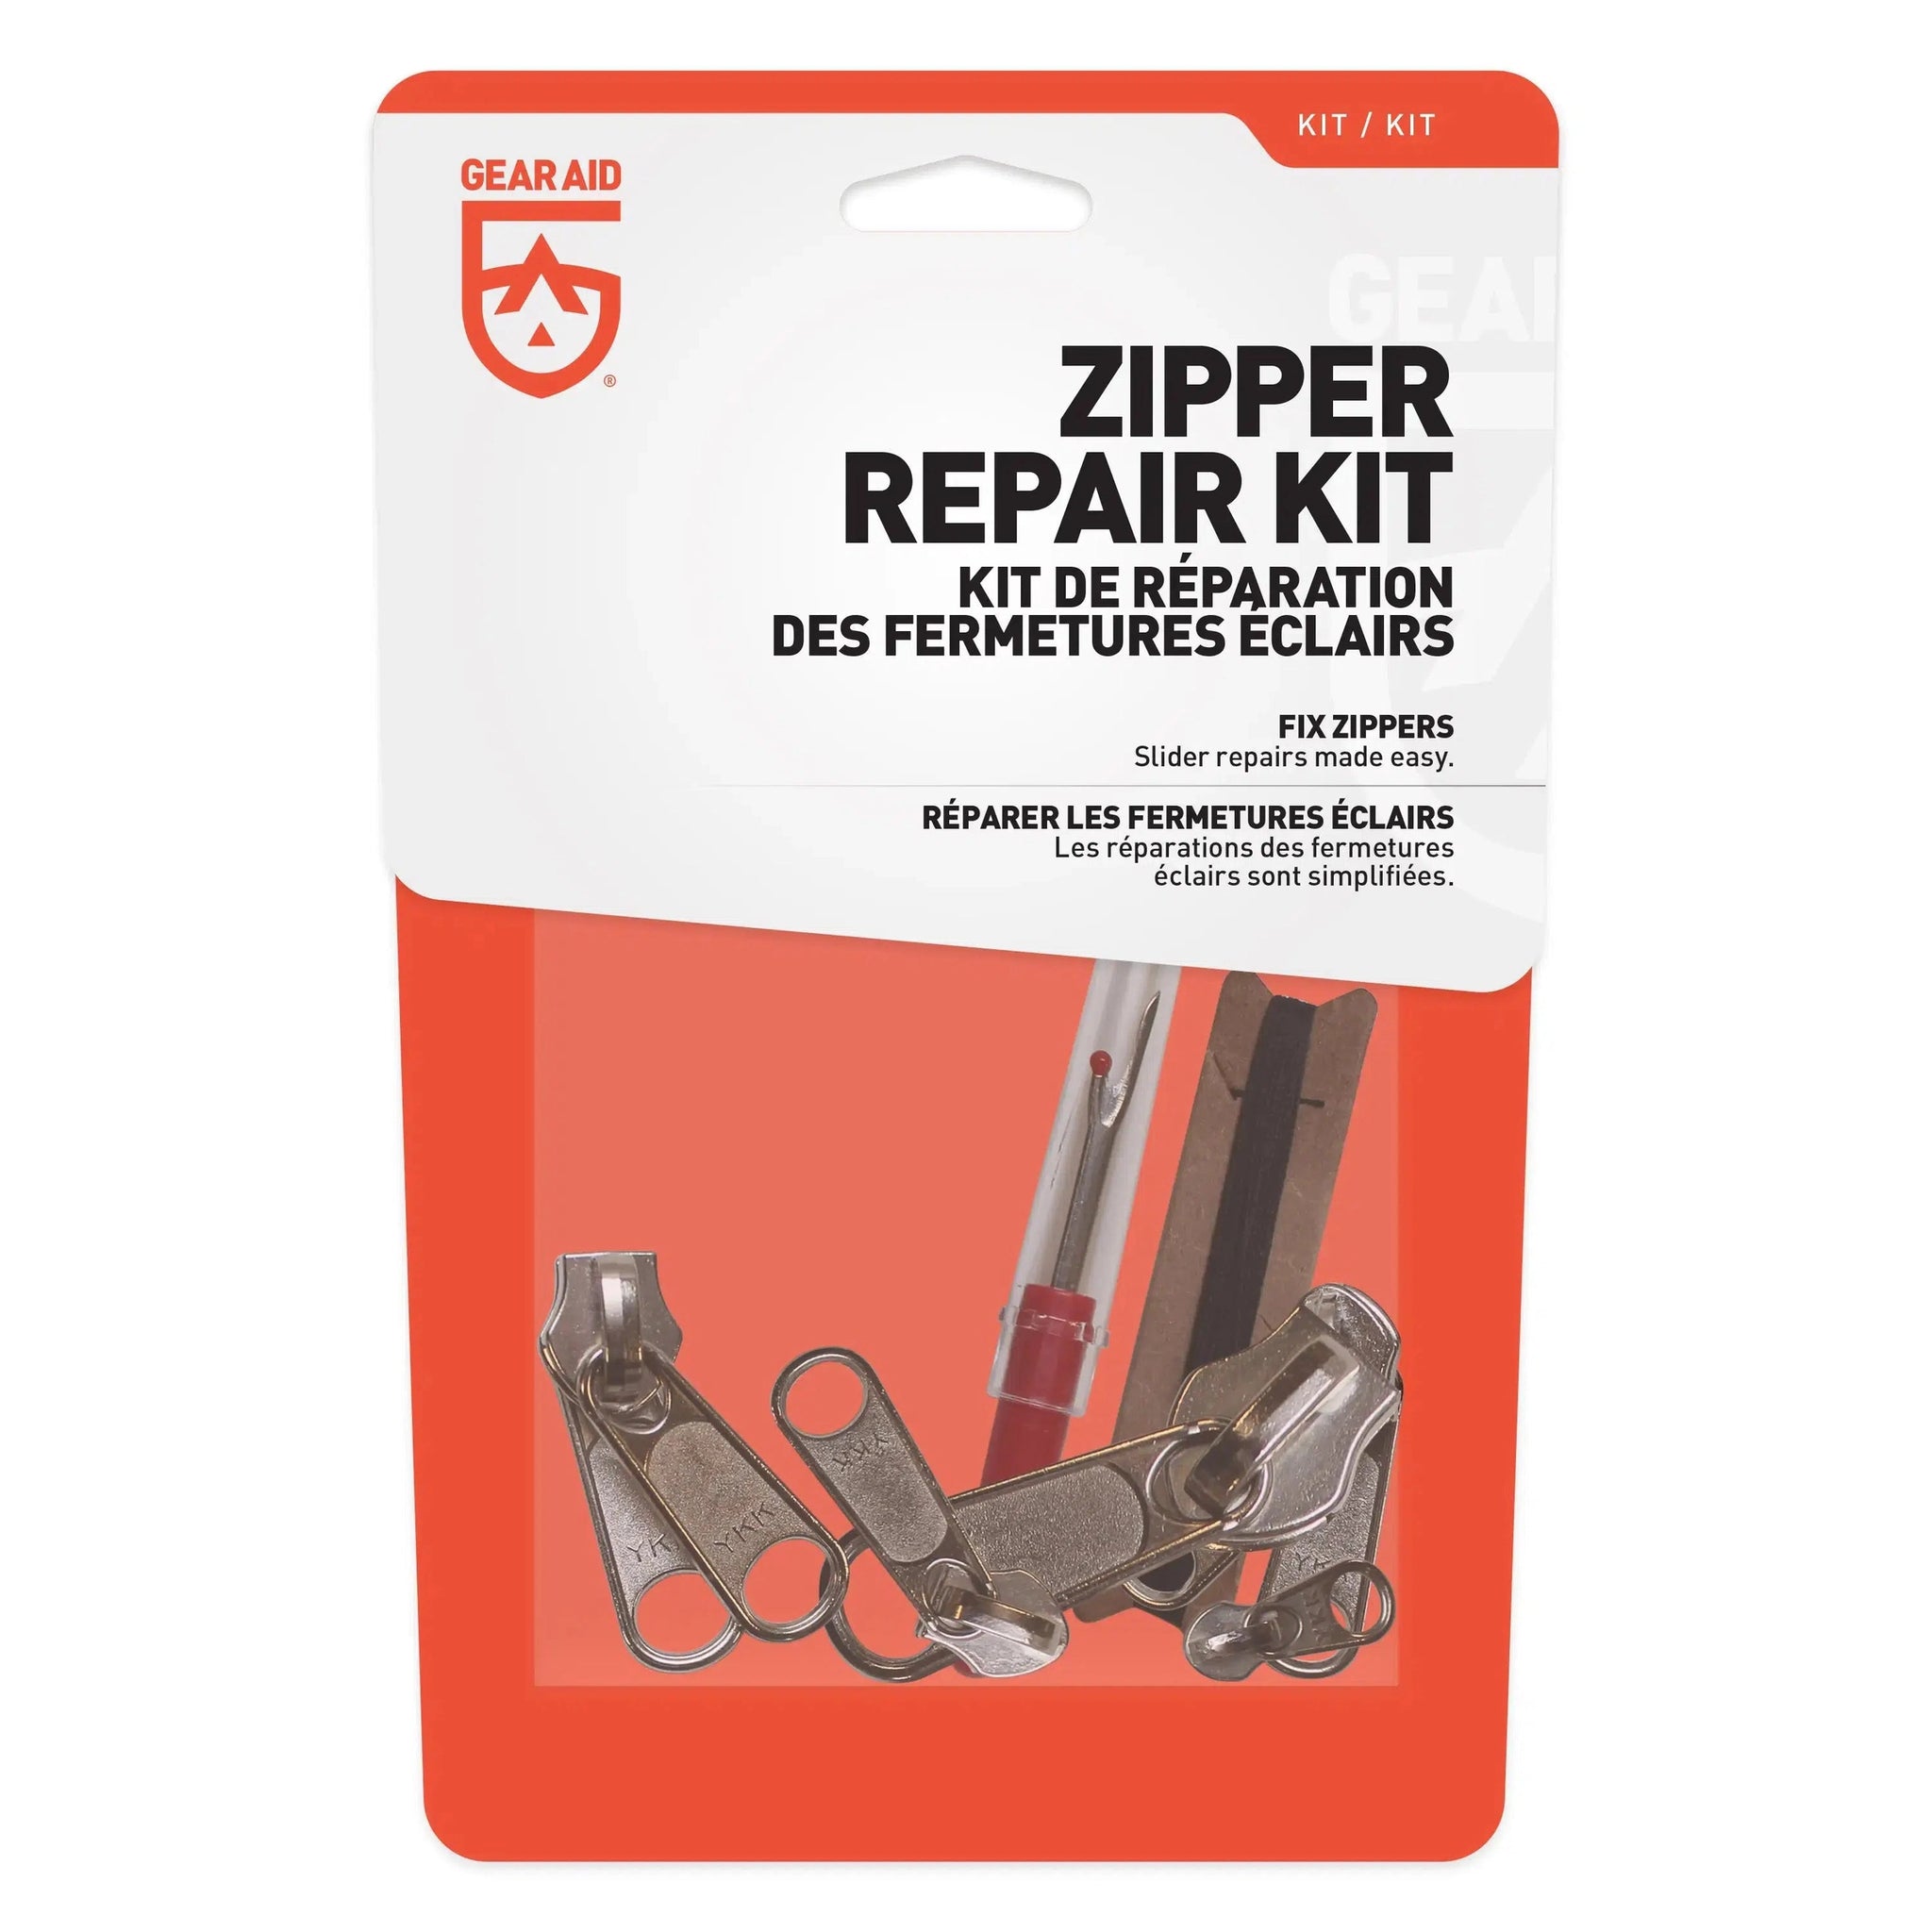 Gear Aid-Zipper Repair Kit-sewing notion-gather here online